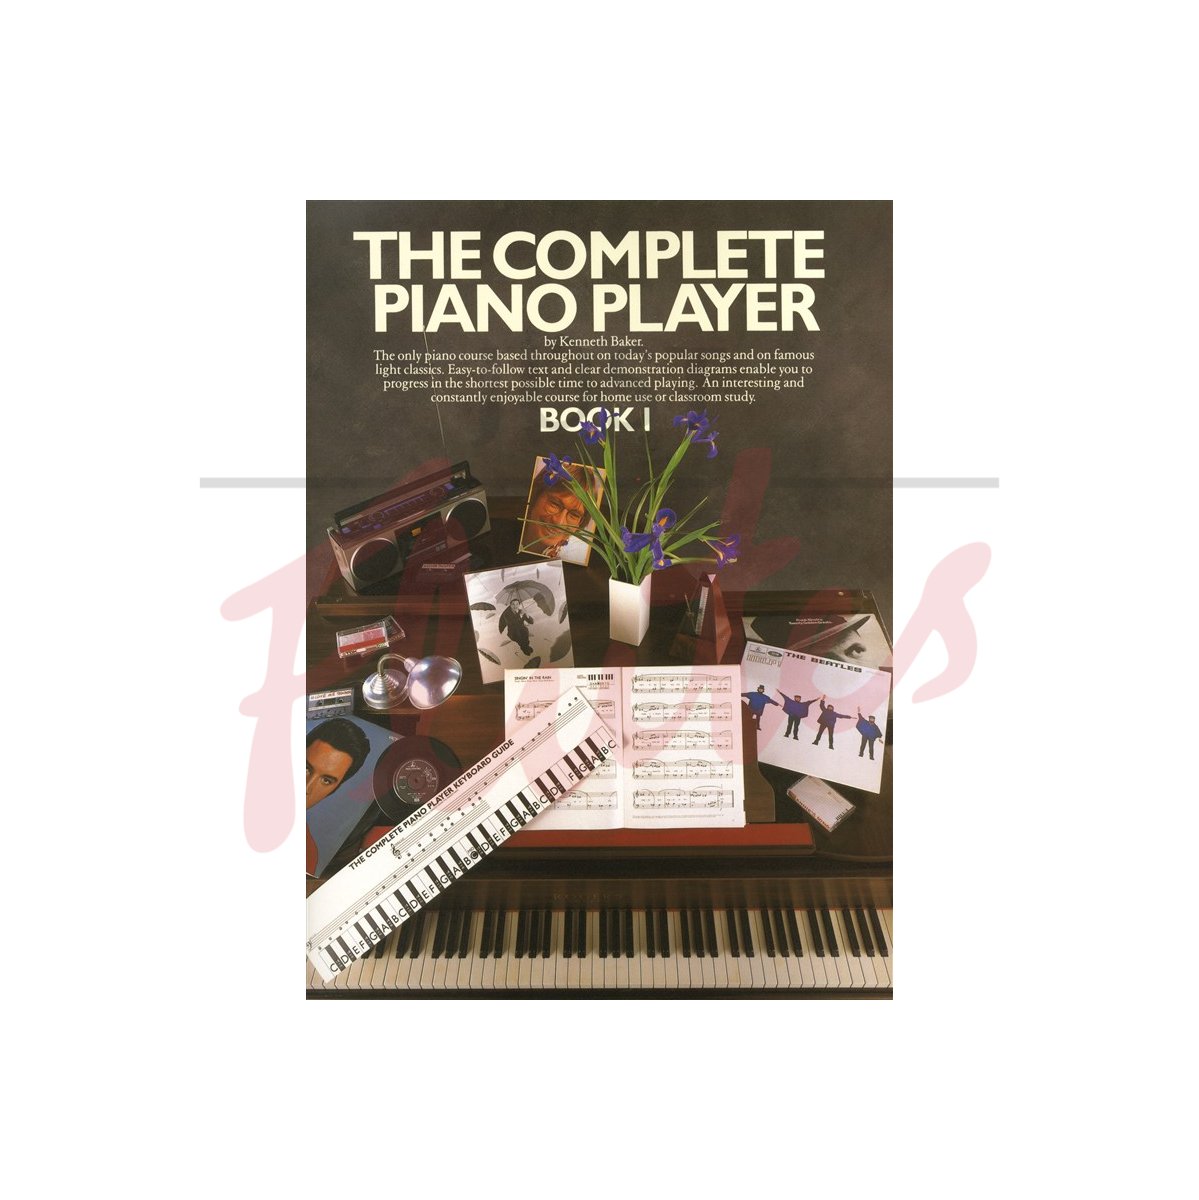 The Complete Piano Player Book 1